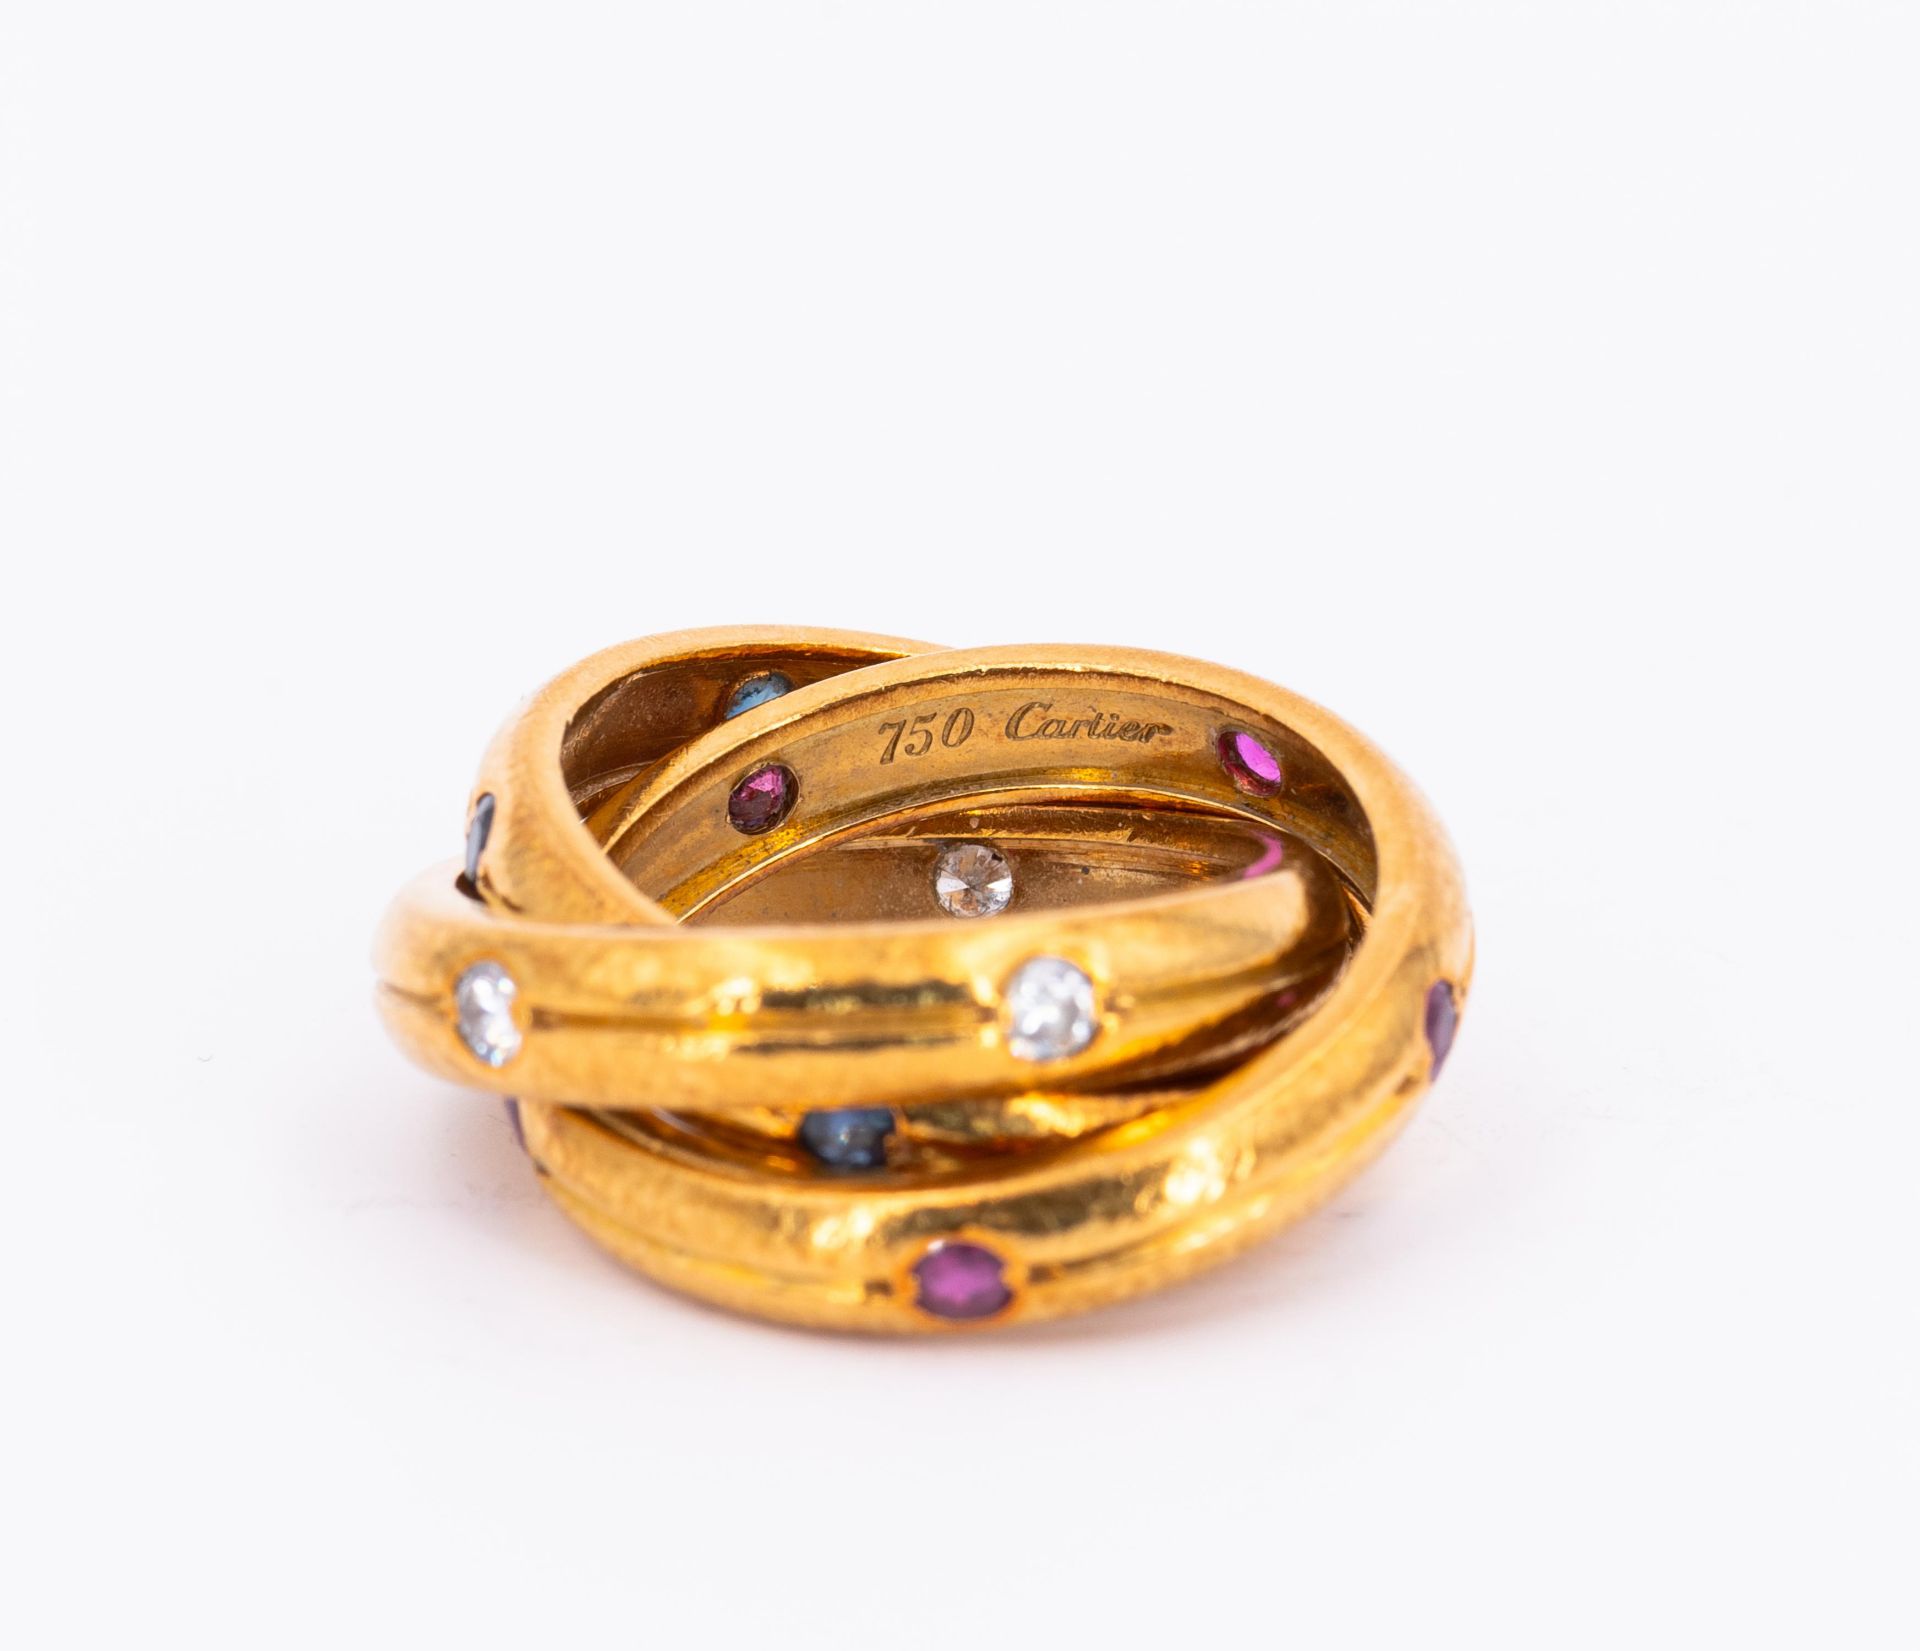 Cartier: Gemstone-Set: Ring and Ear Clip-Ons - Image 5 of 7